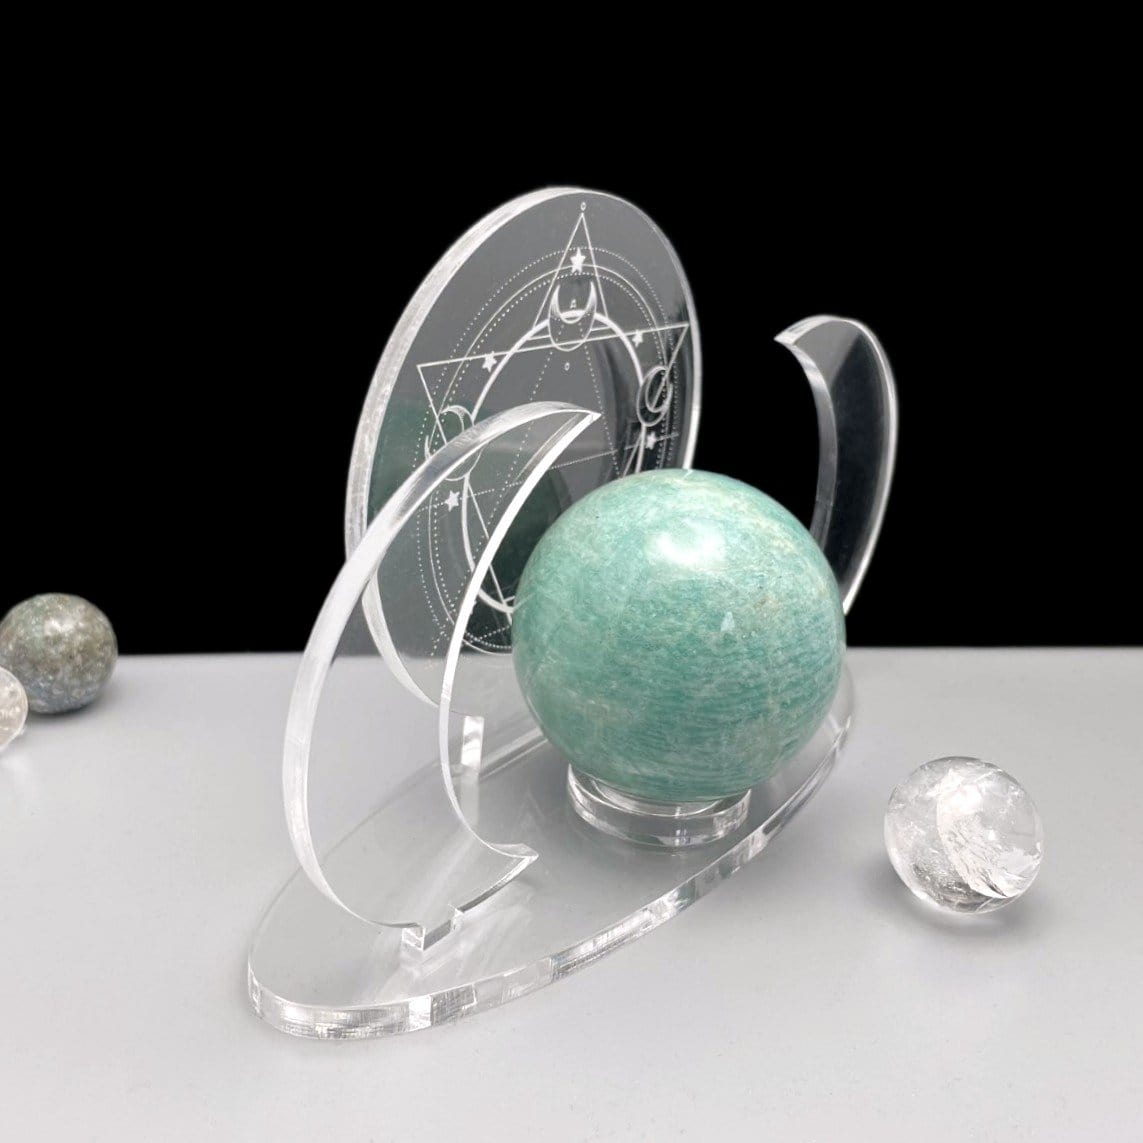 Shown at an angle - Acrylic Sphere Holder Crescent Moons - Six Pointed Star holding a sphere.